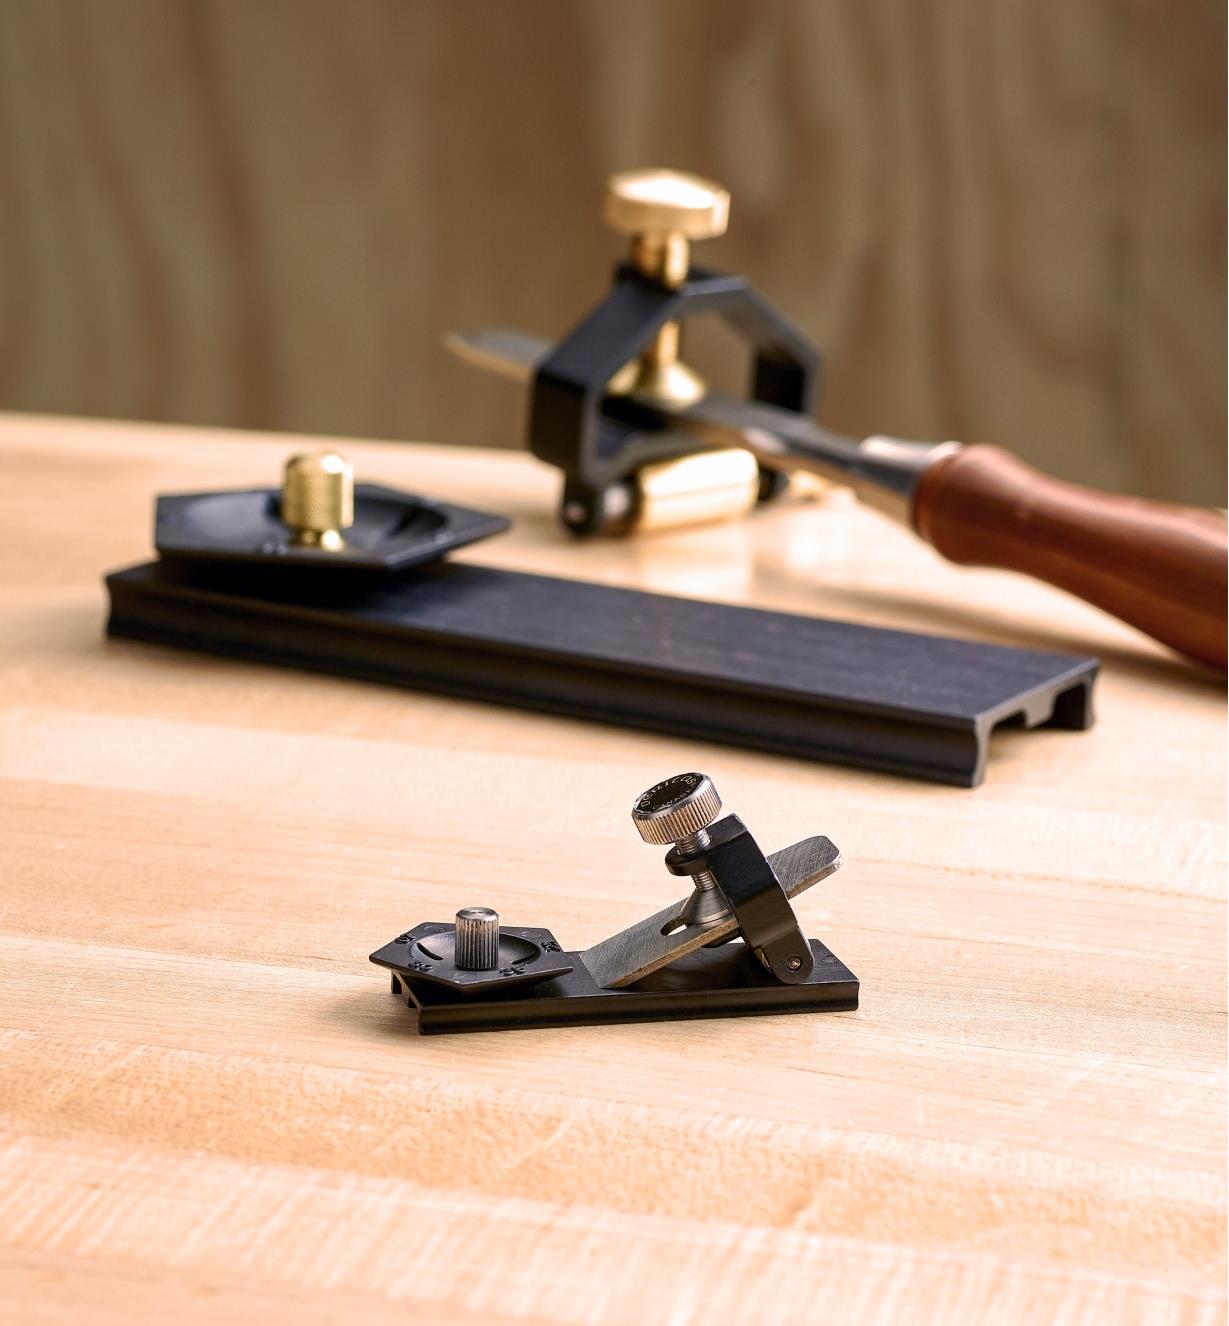 A small blade clamped in the miniature honing guide rests on the angle jig while a full-size version of the sharpening system appears in the background